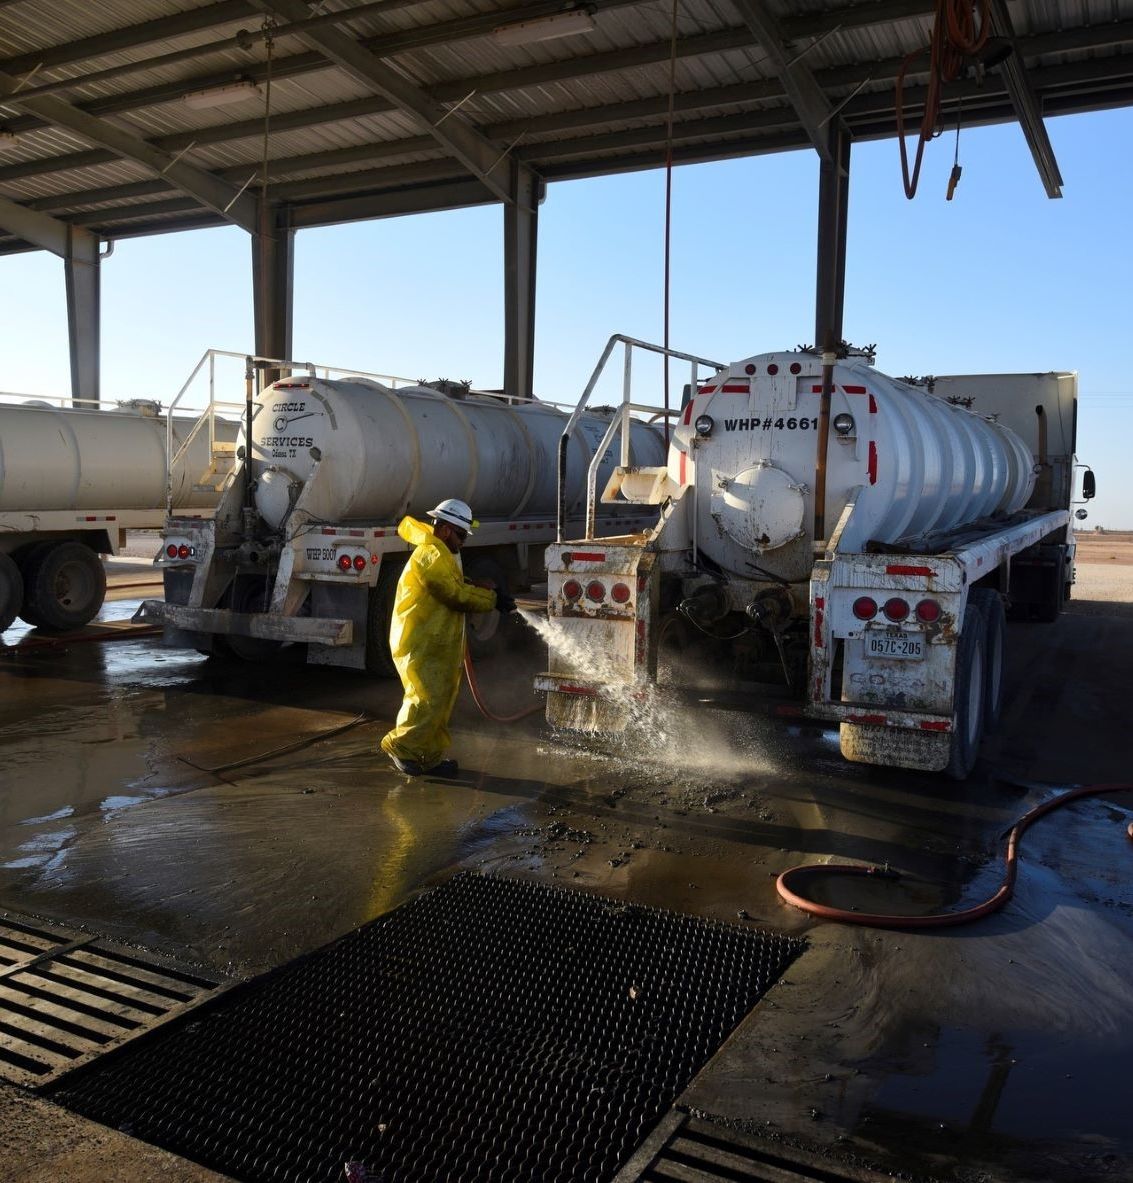 A milestone worker cleaning the truck bays